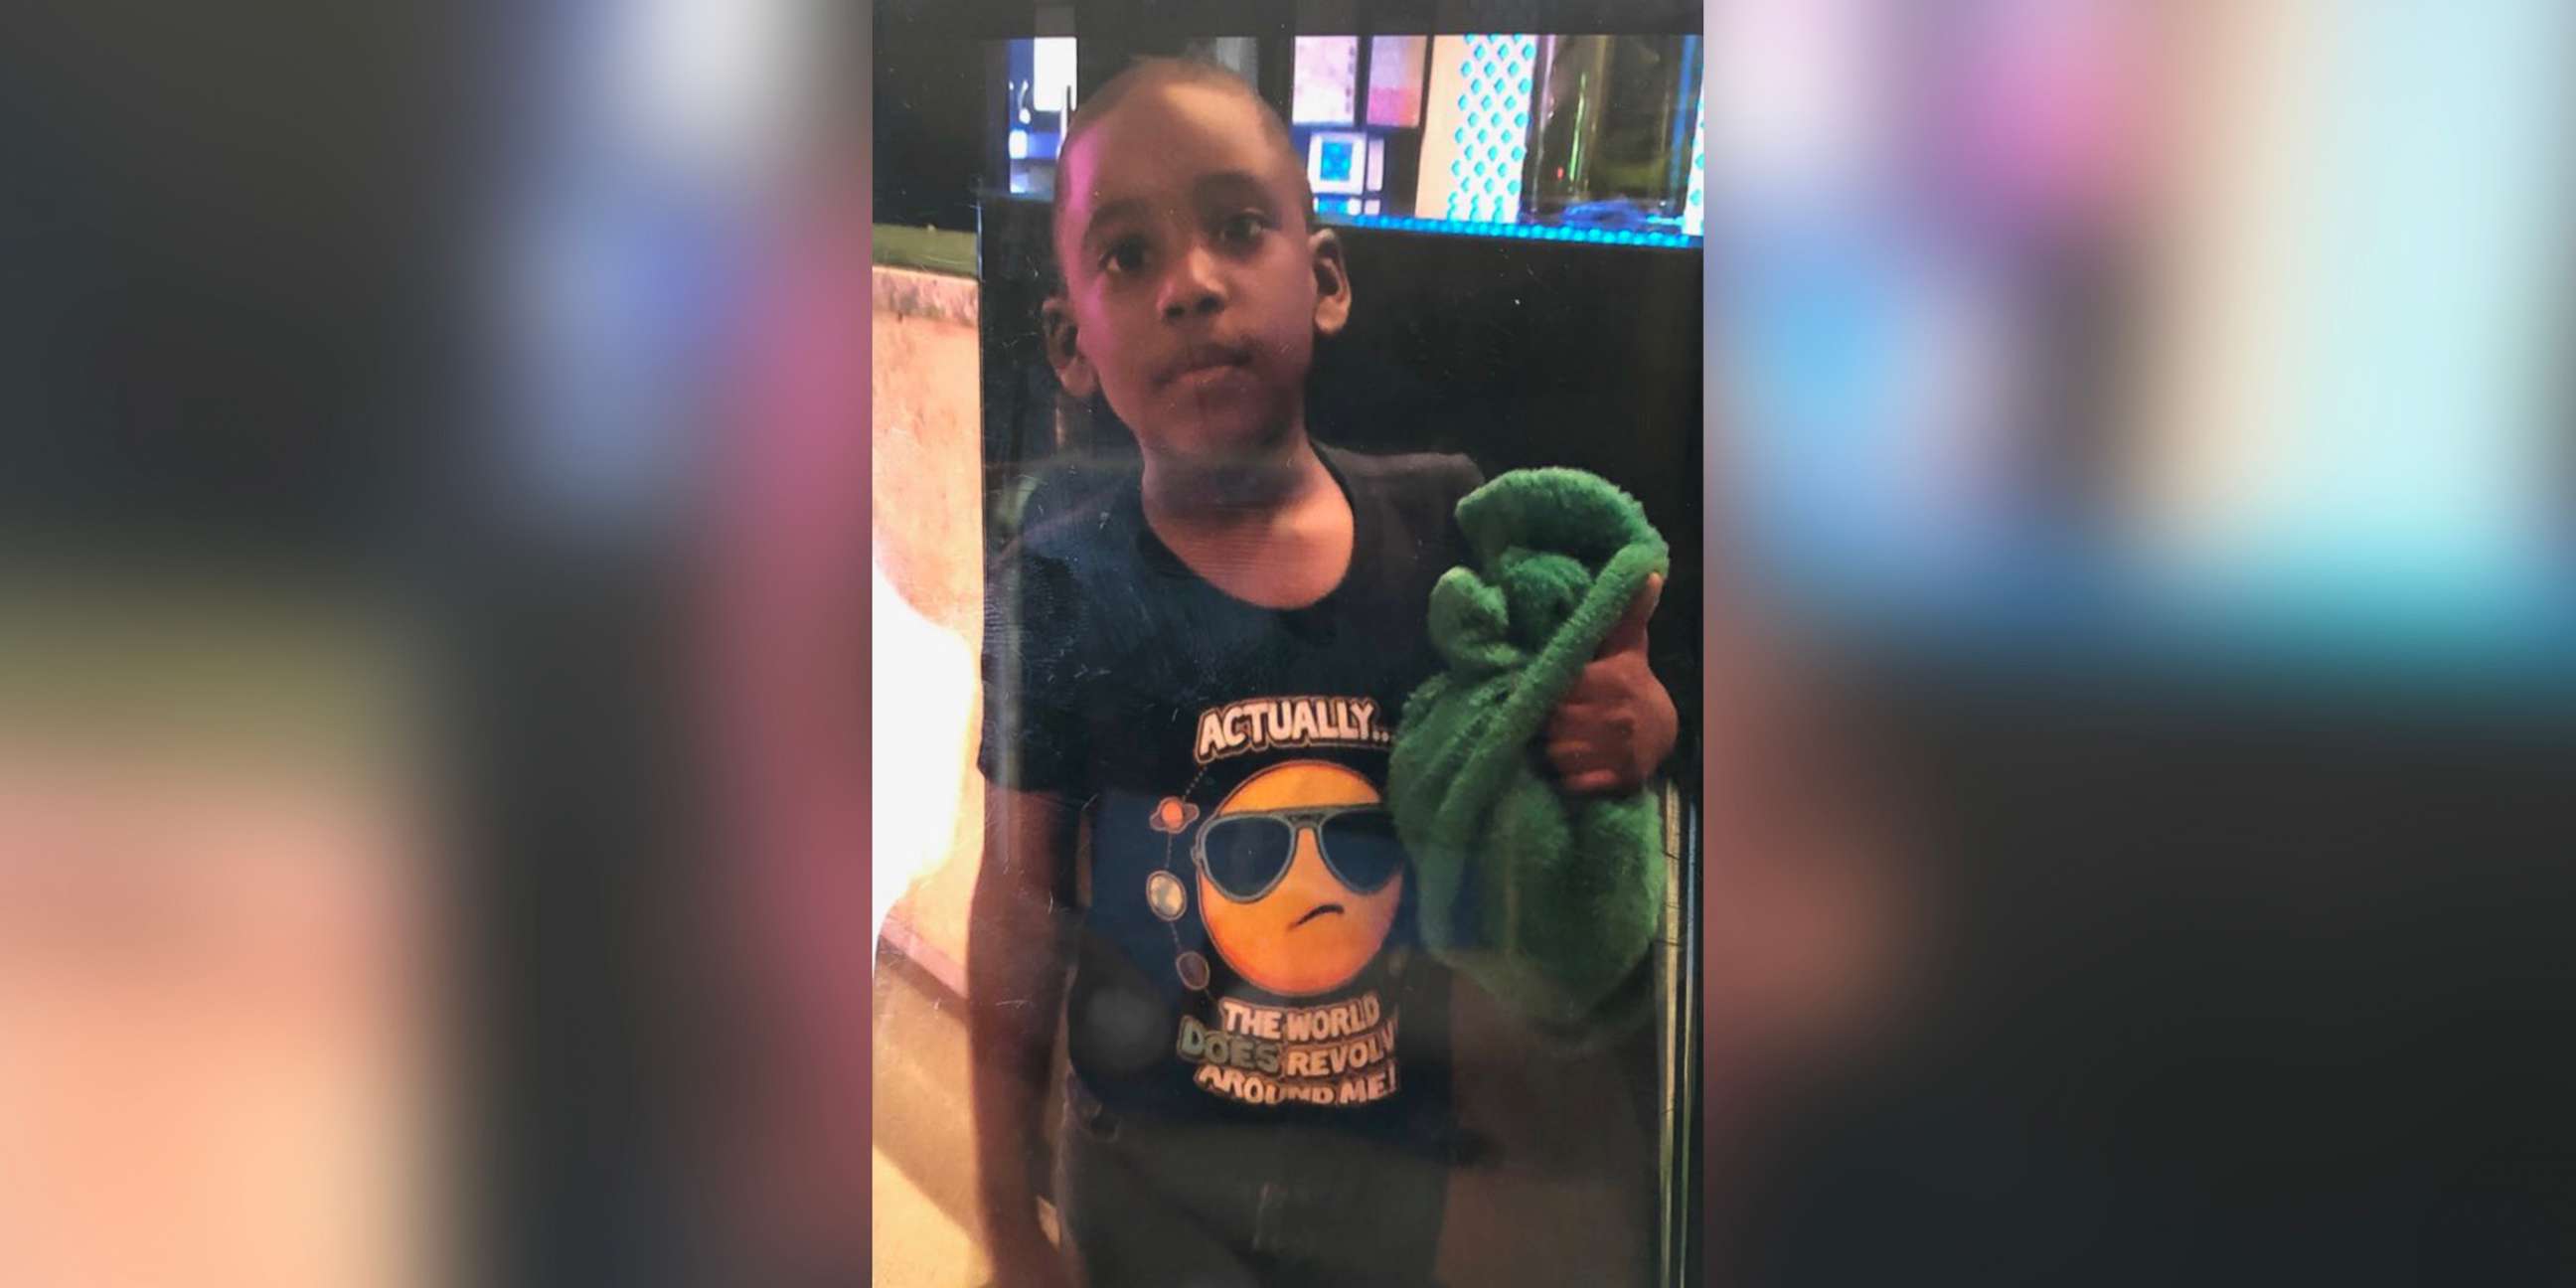 PHOTO: Police in are searching for 6-year-old Ronald Mowatt, who was abducted in Brooklyn on Monday.